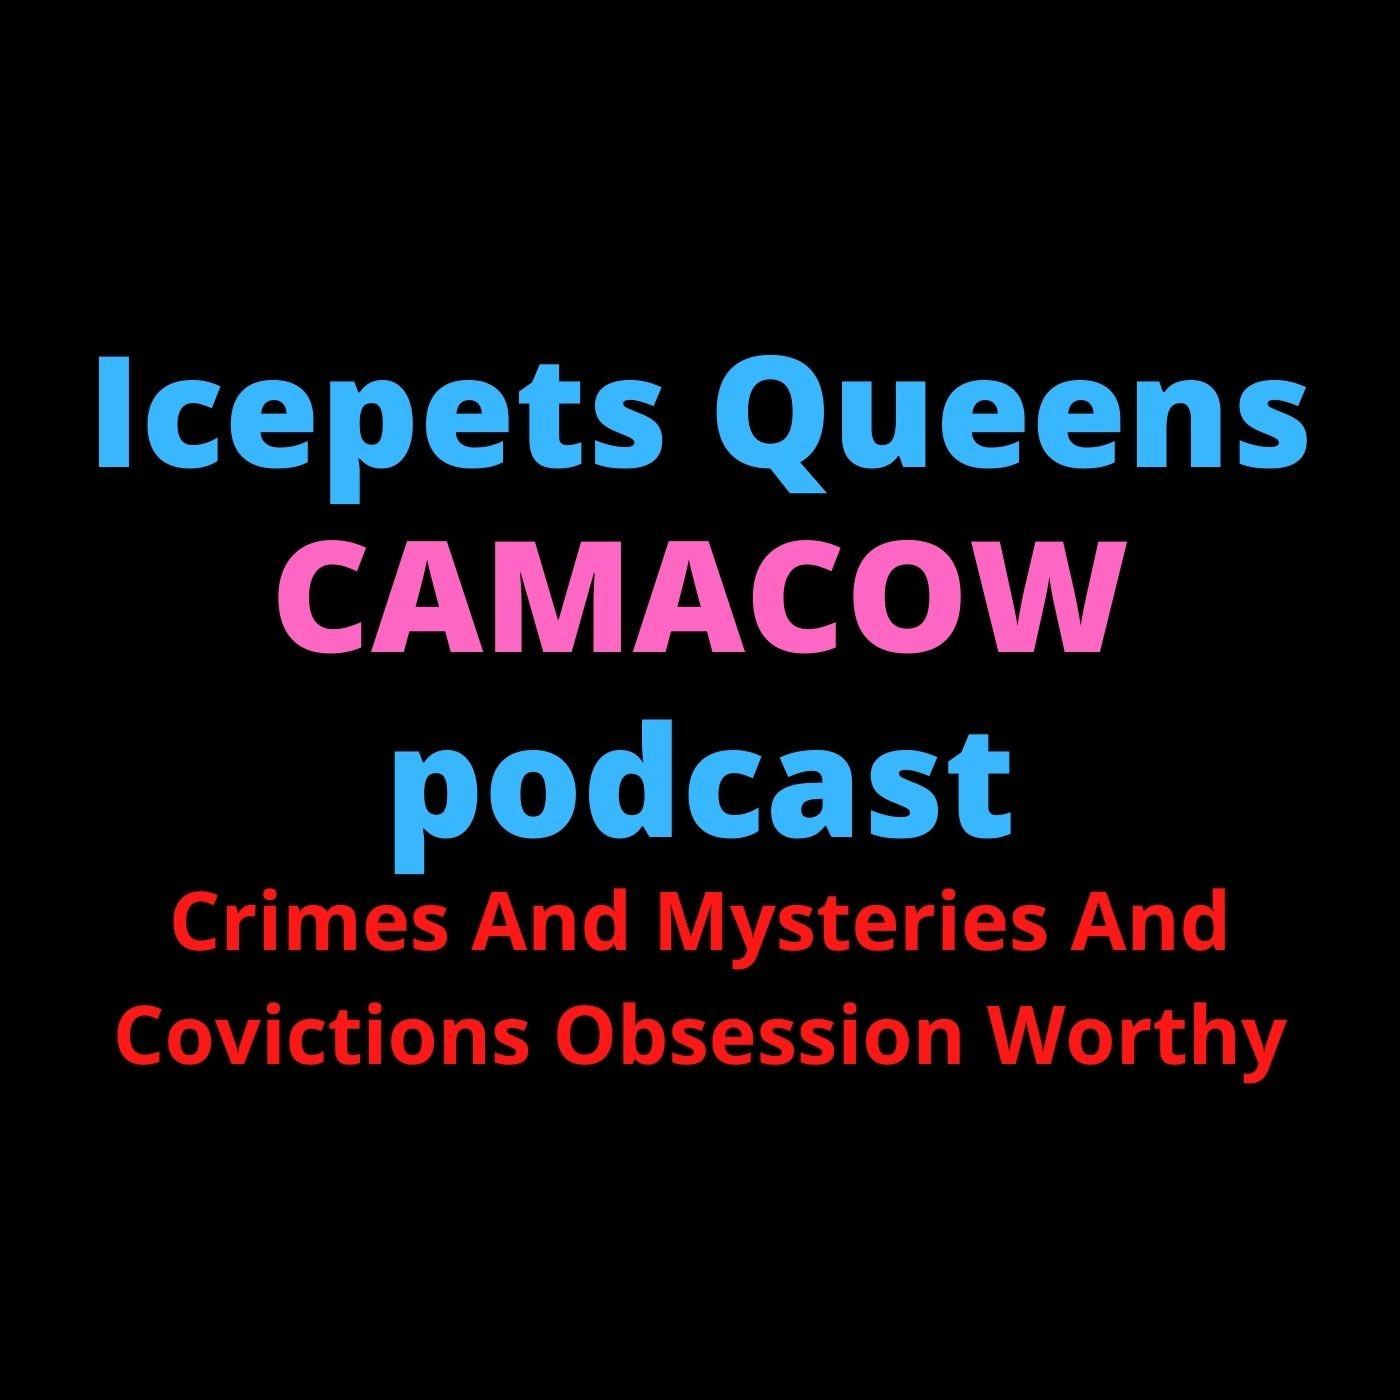 Icepets Queen's CAMACOW podcast